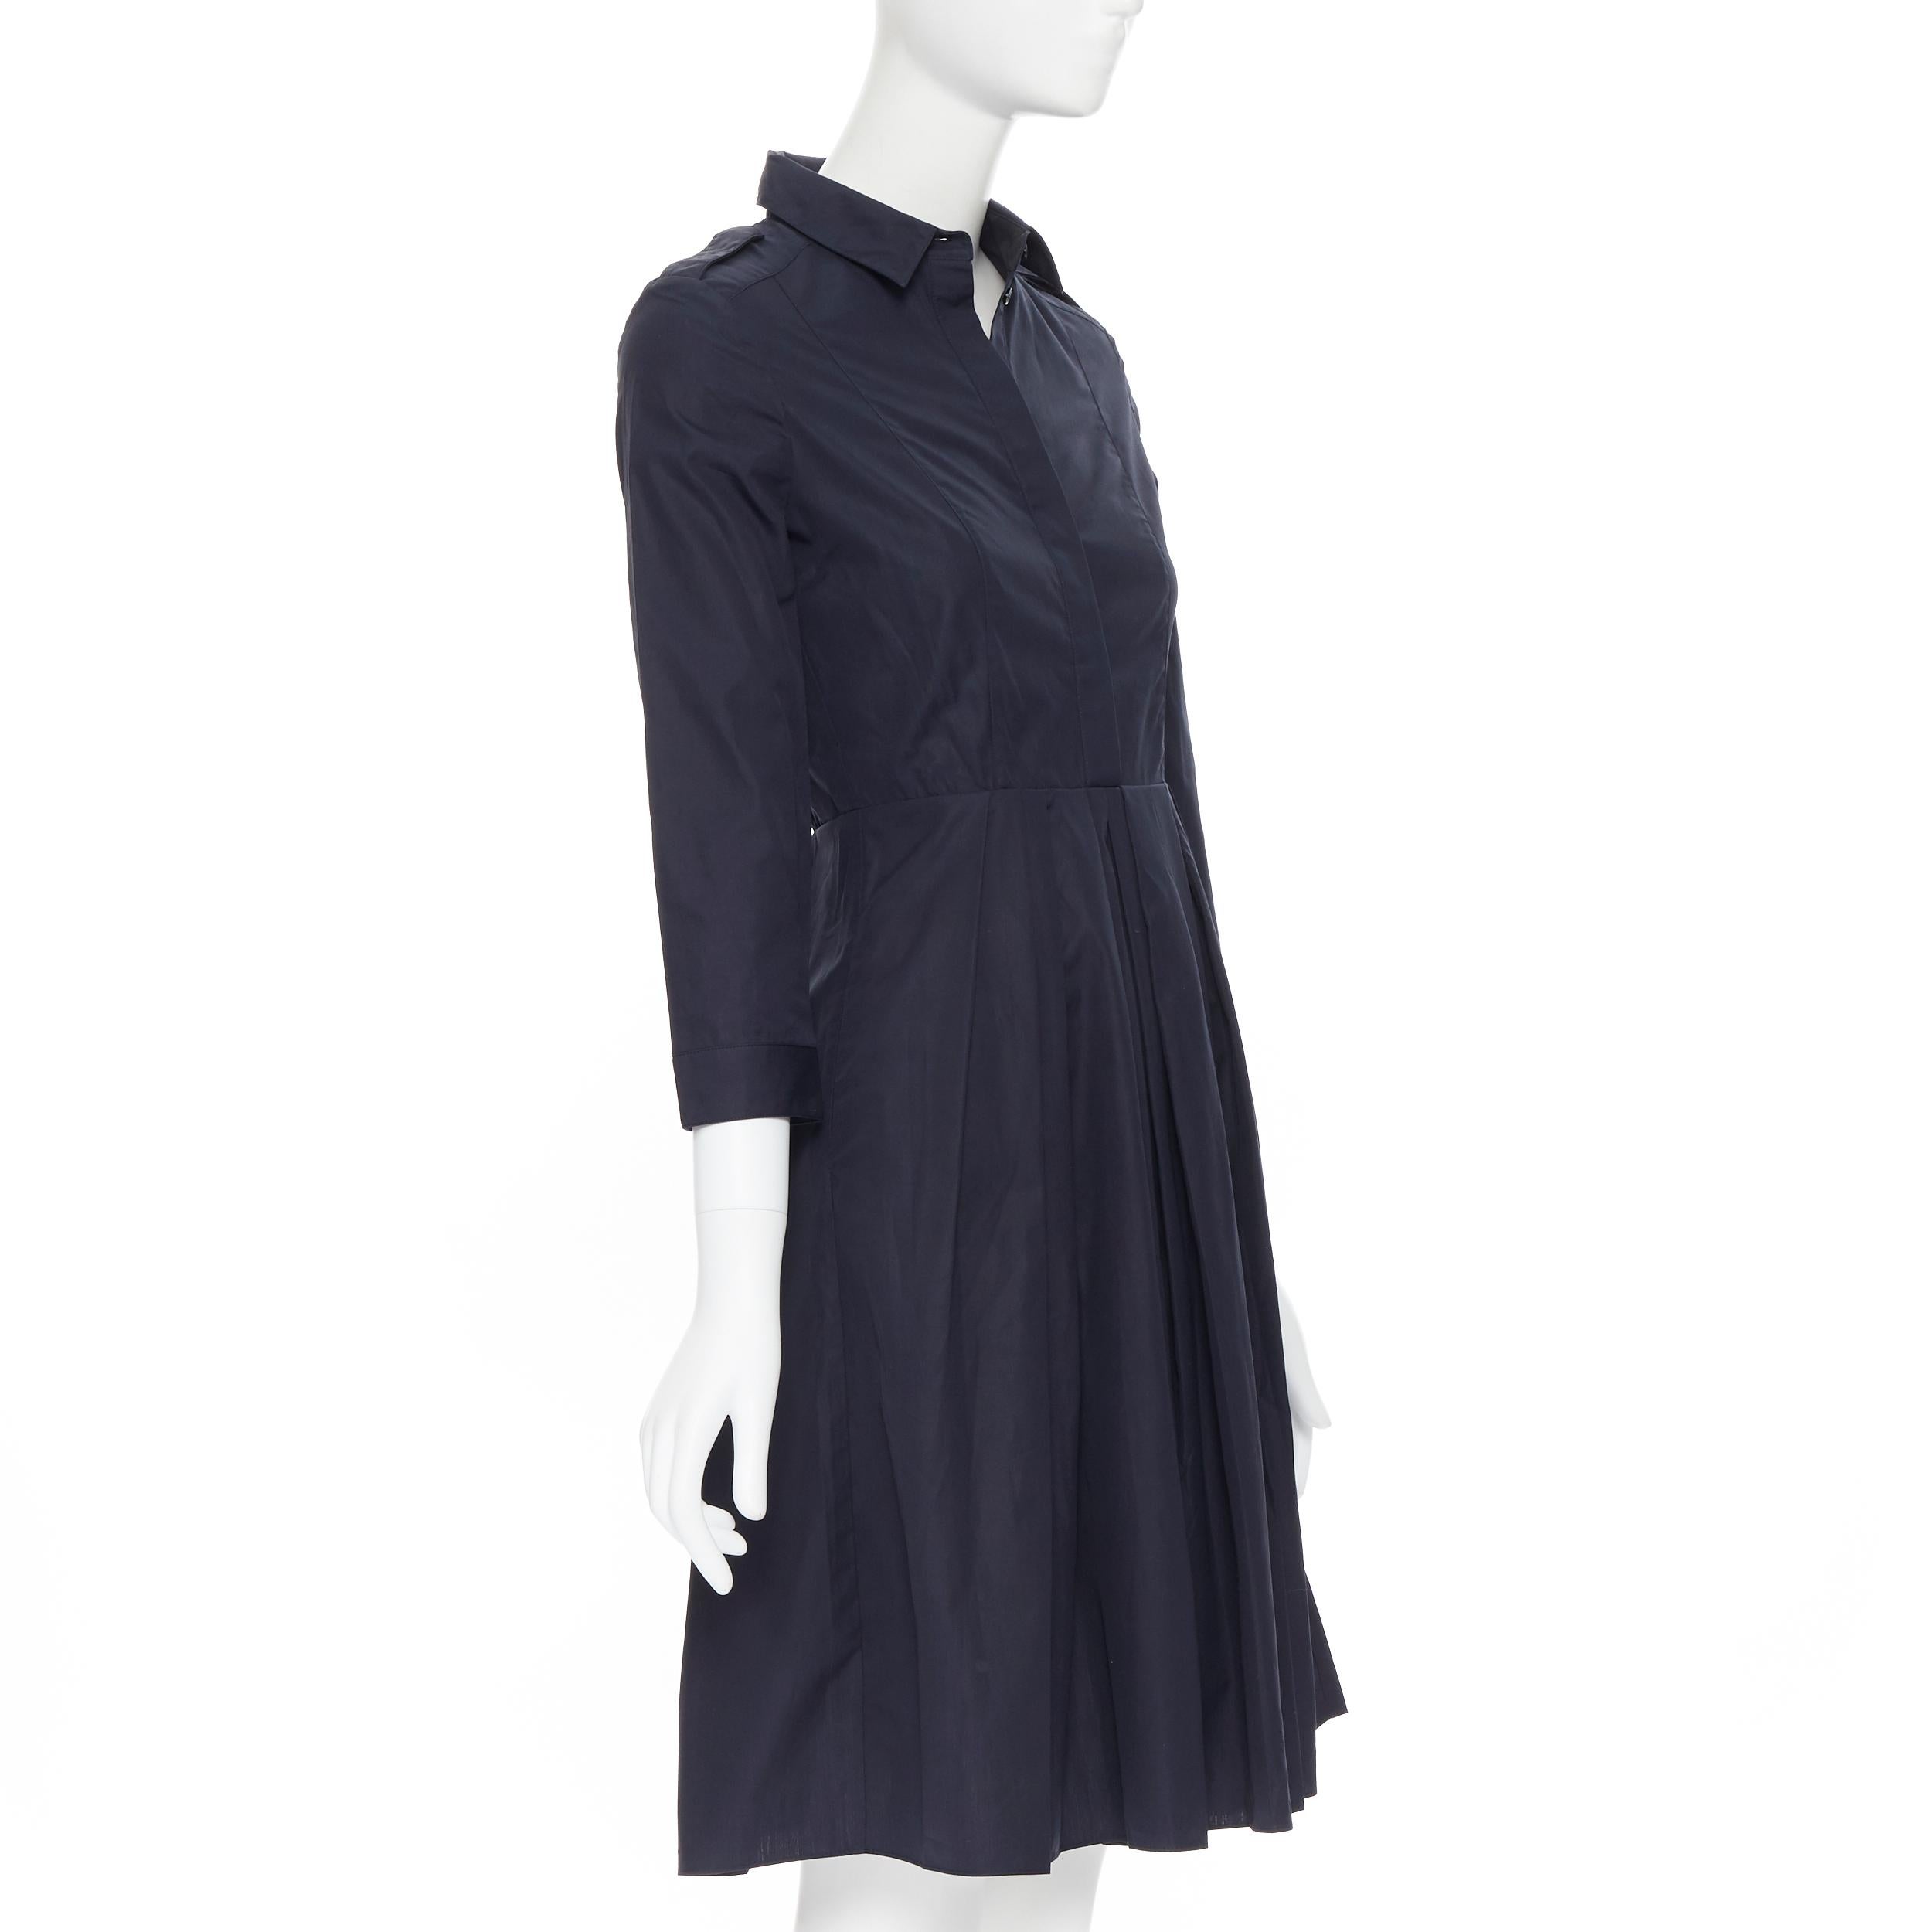 BURBERRY navy blue cotton pleated skirt safari detail flared dress UK4 XS 
Reference: SNKO/A00107 
Brand: Burberry 
Material: Cotton 
Color: Navy 
Pattern: Solid 
Closure: Button 
Extra Detail: Military inspired shoulder epaulette design. Concealed